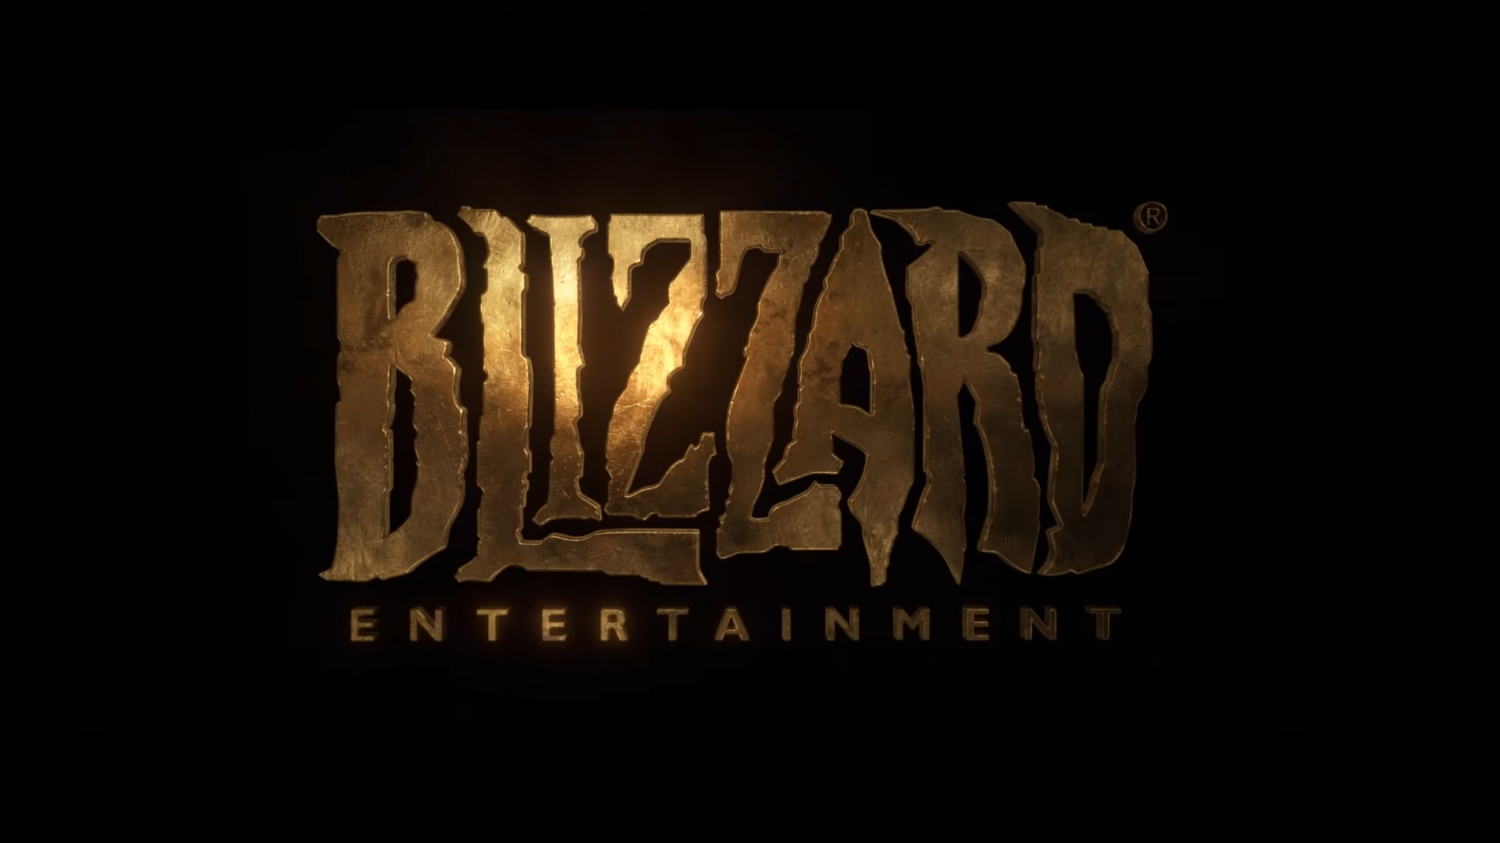 Blizzard games are coming to Steam